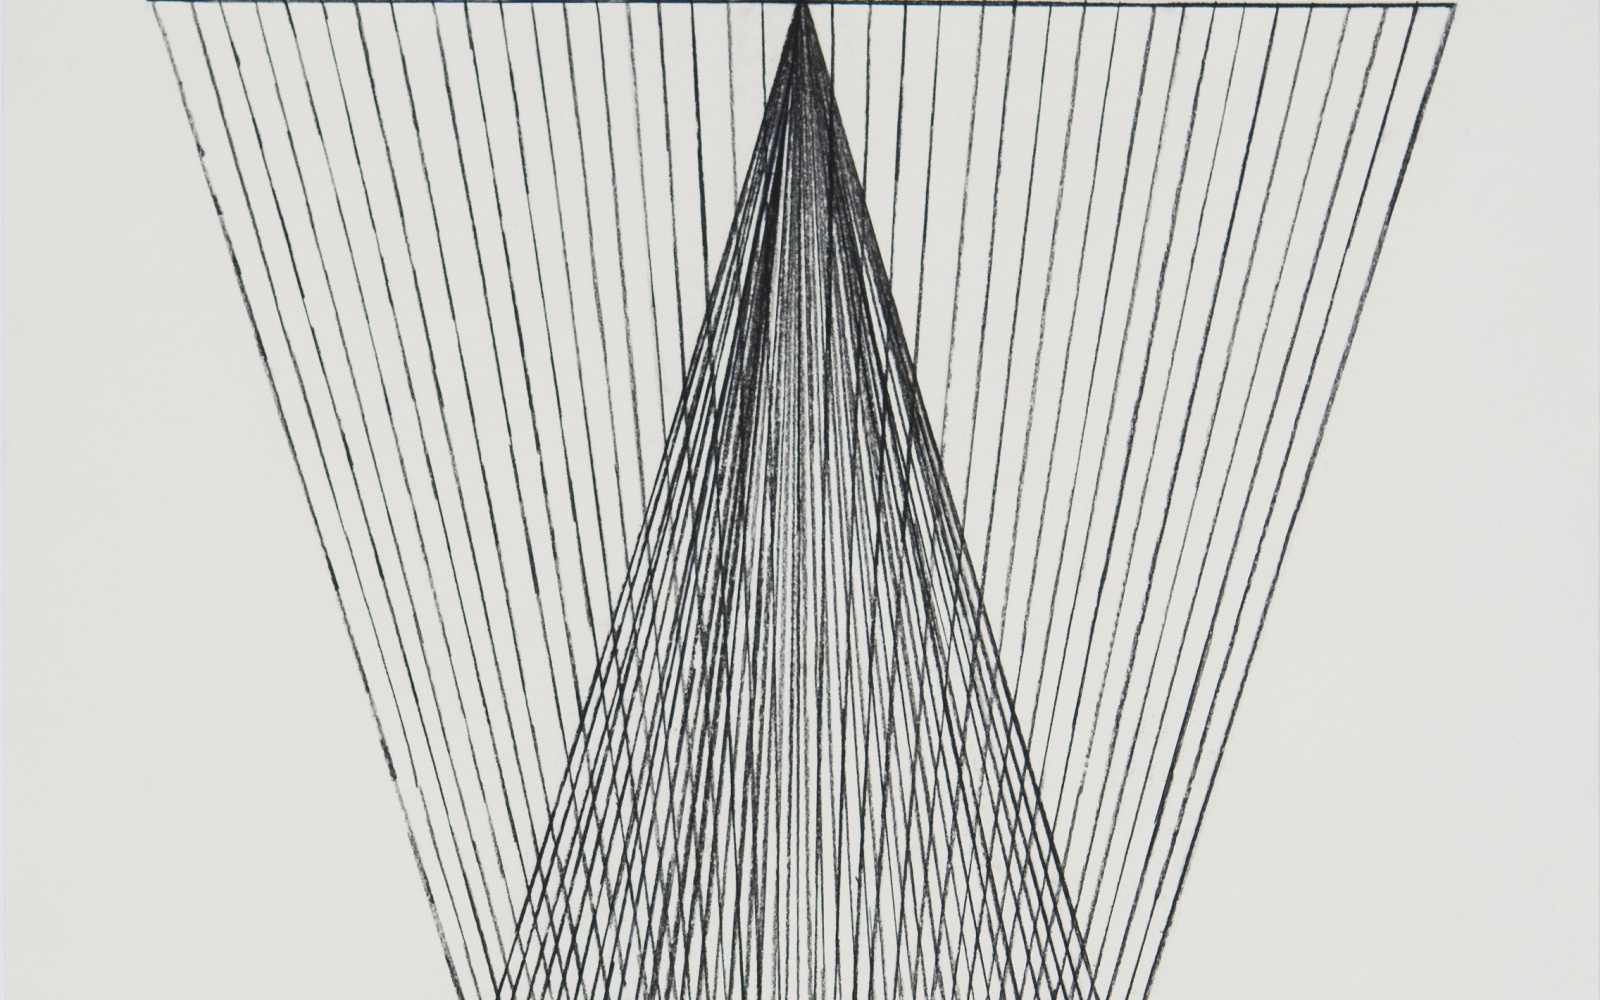 The work consists of Two triangles that meet with the tip at the greater length of the other triangle. The image is made of ink with reed pen on paper.